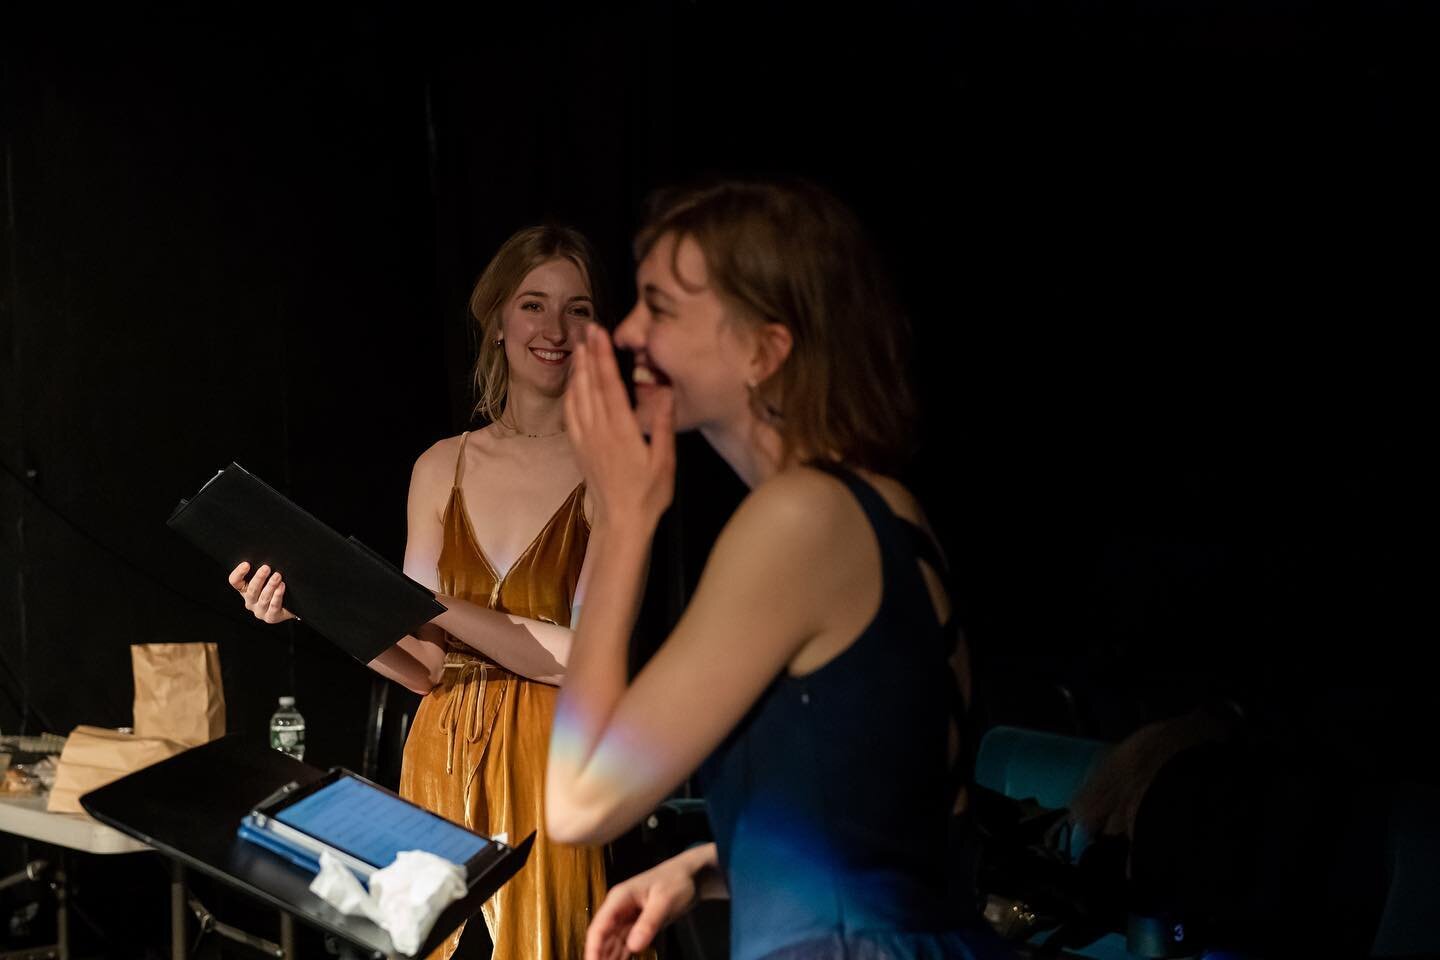 secret&rsquo;s out! 🤫 👀 

these two (@walking_singing &amp; @anna.chronisms plus the rest of the gang) will be in Minneapolis at @newmusicgathering on August 13th! We&rsquo;re closing the night with a participatory performance that&rsquo;ll put our